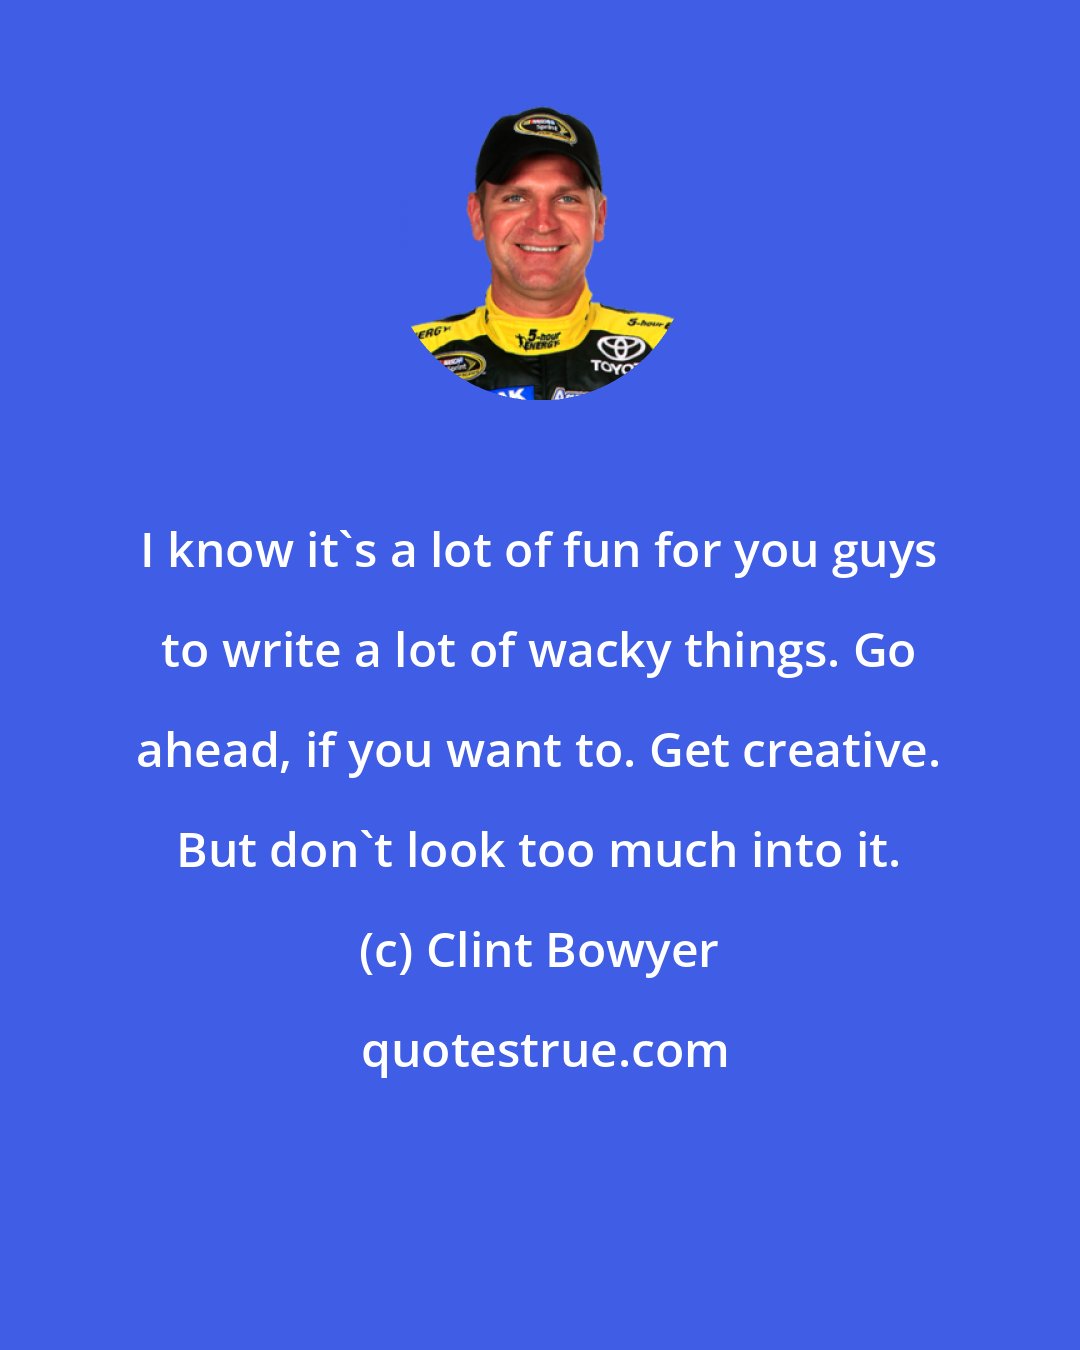 Clint Bowyer: I know it's a lot of fun for you guys to write a lot of wacky things. Go ahead, if you want to. Get creative. But don't look too much into it.